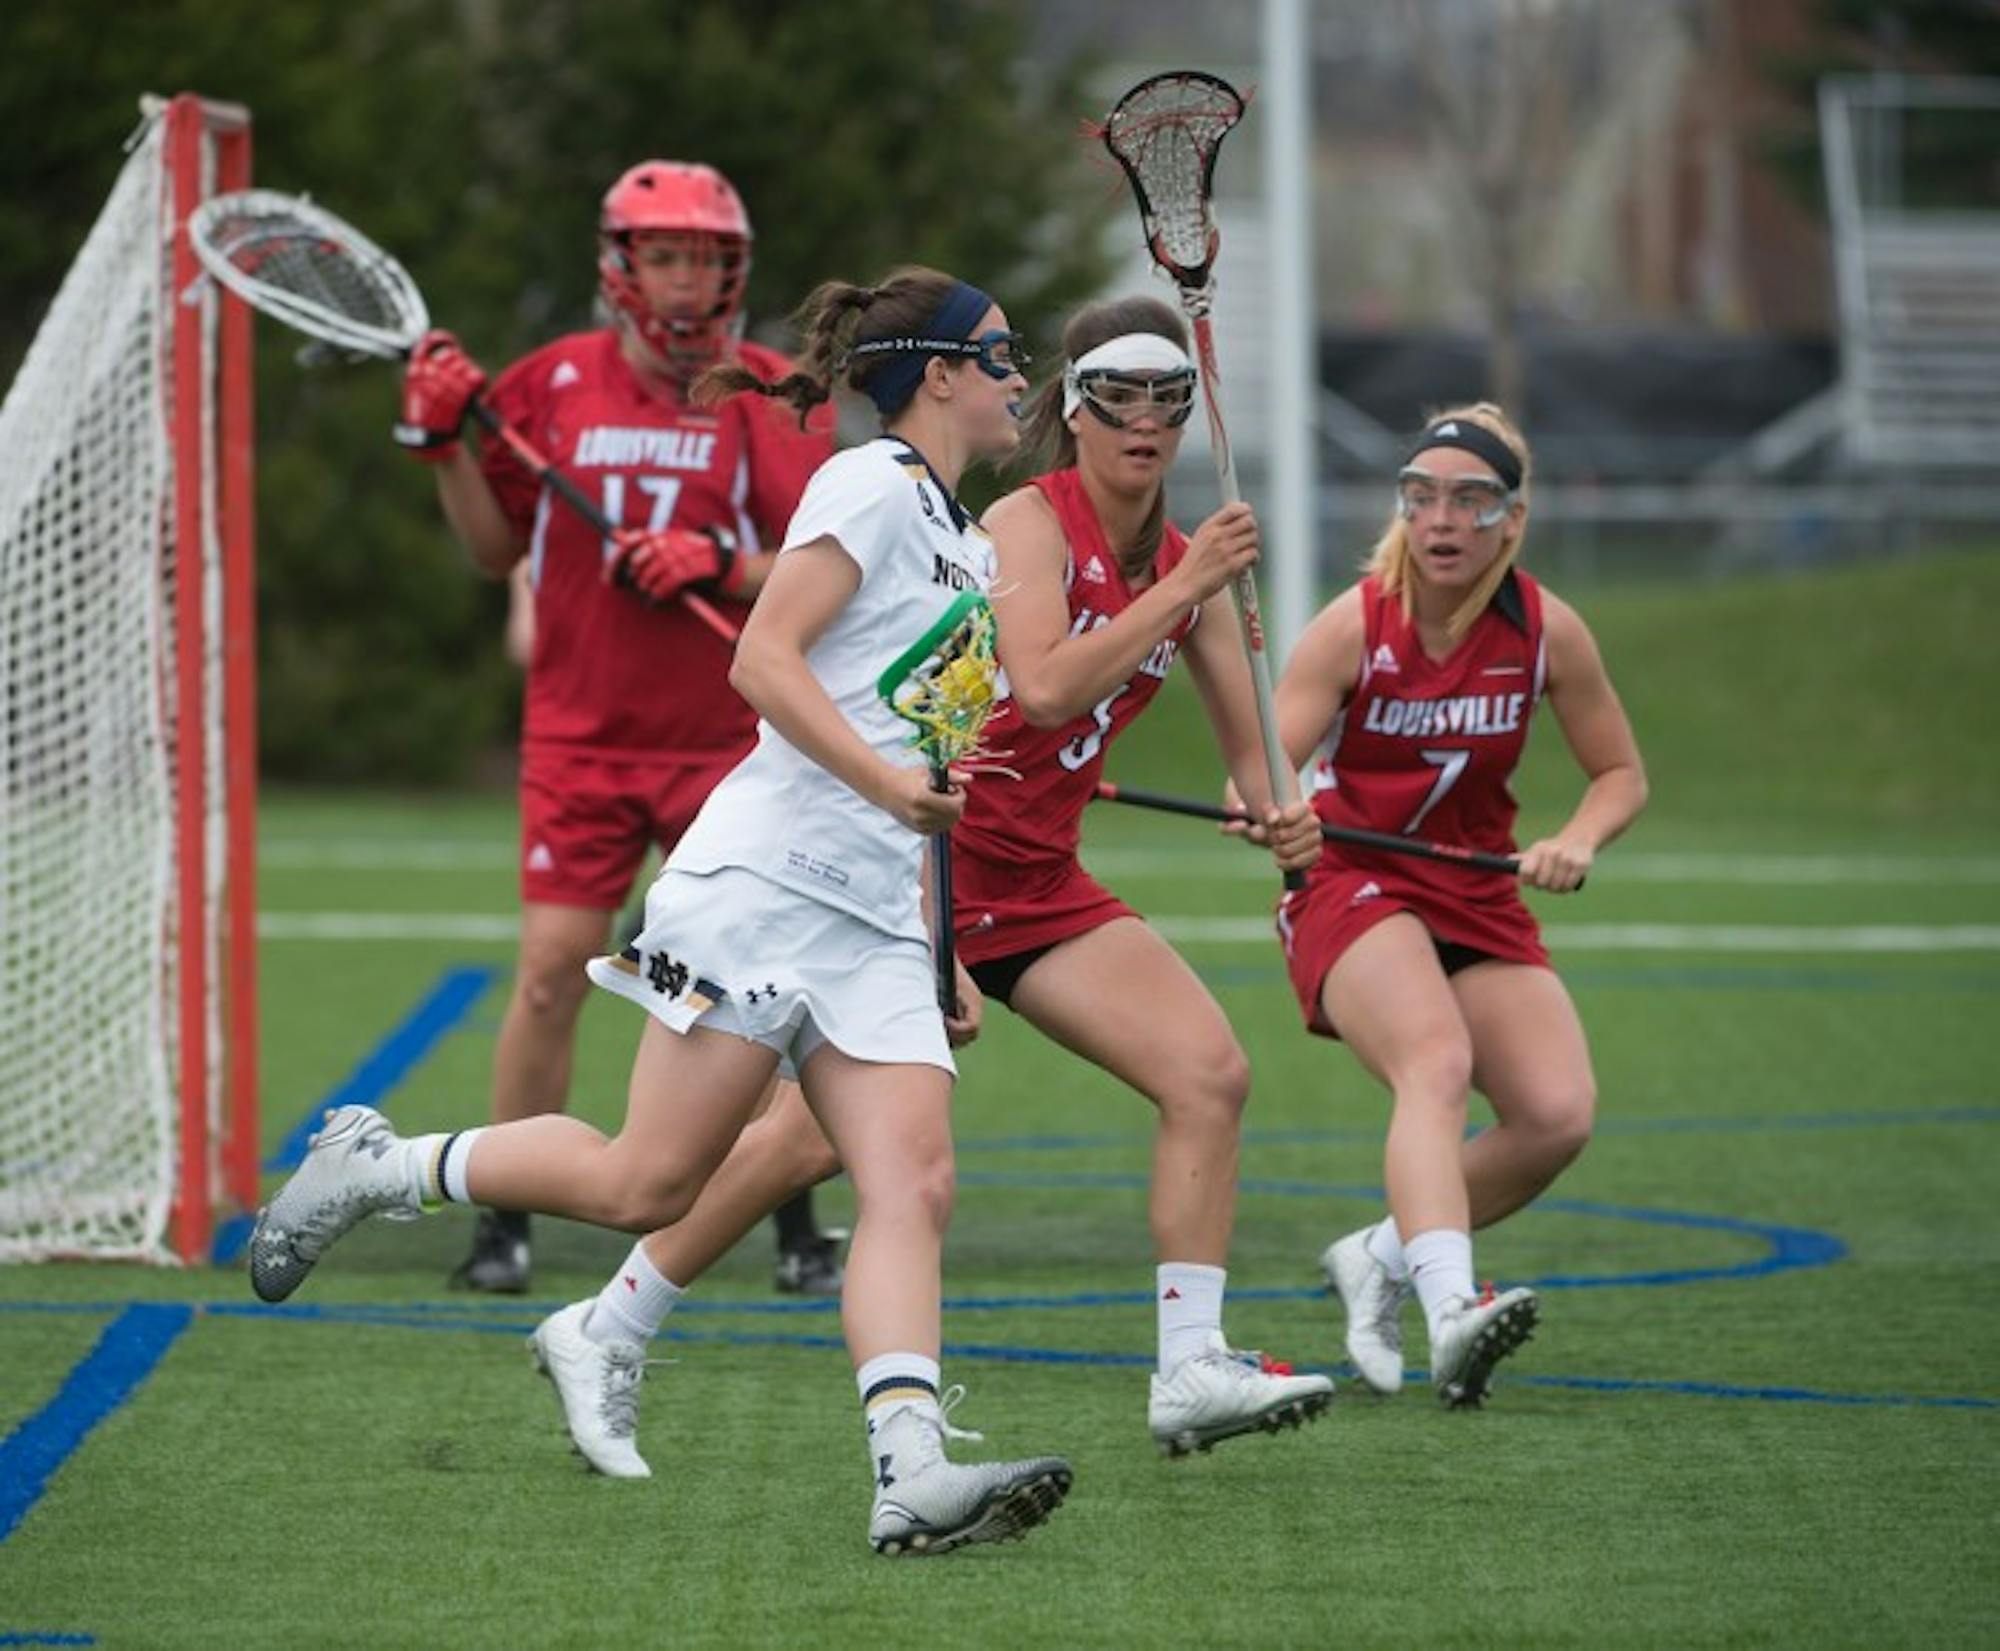 Sophomore attack Courtney Fortunato cradles the ball in Sunday’s 10-8 loss to Louisville. Fortunato had four goals in the defeat.